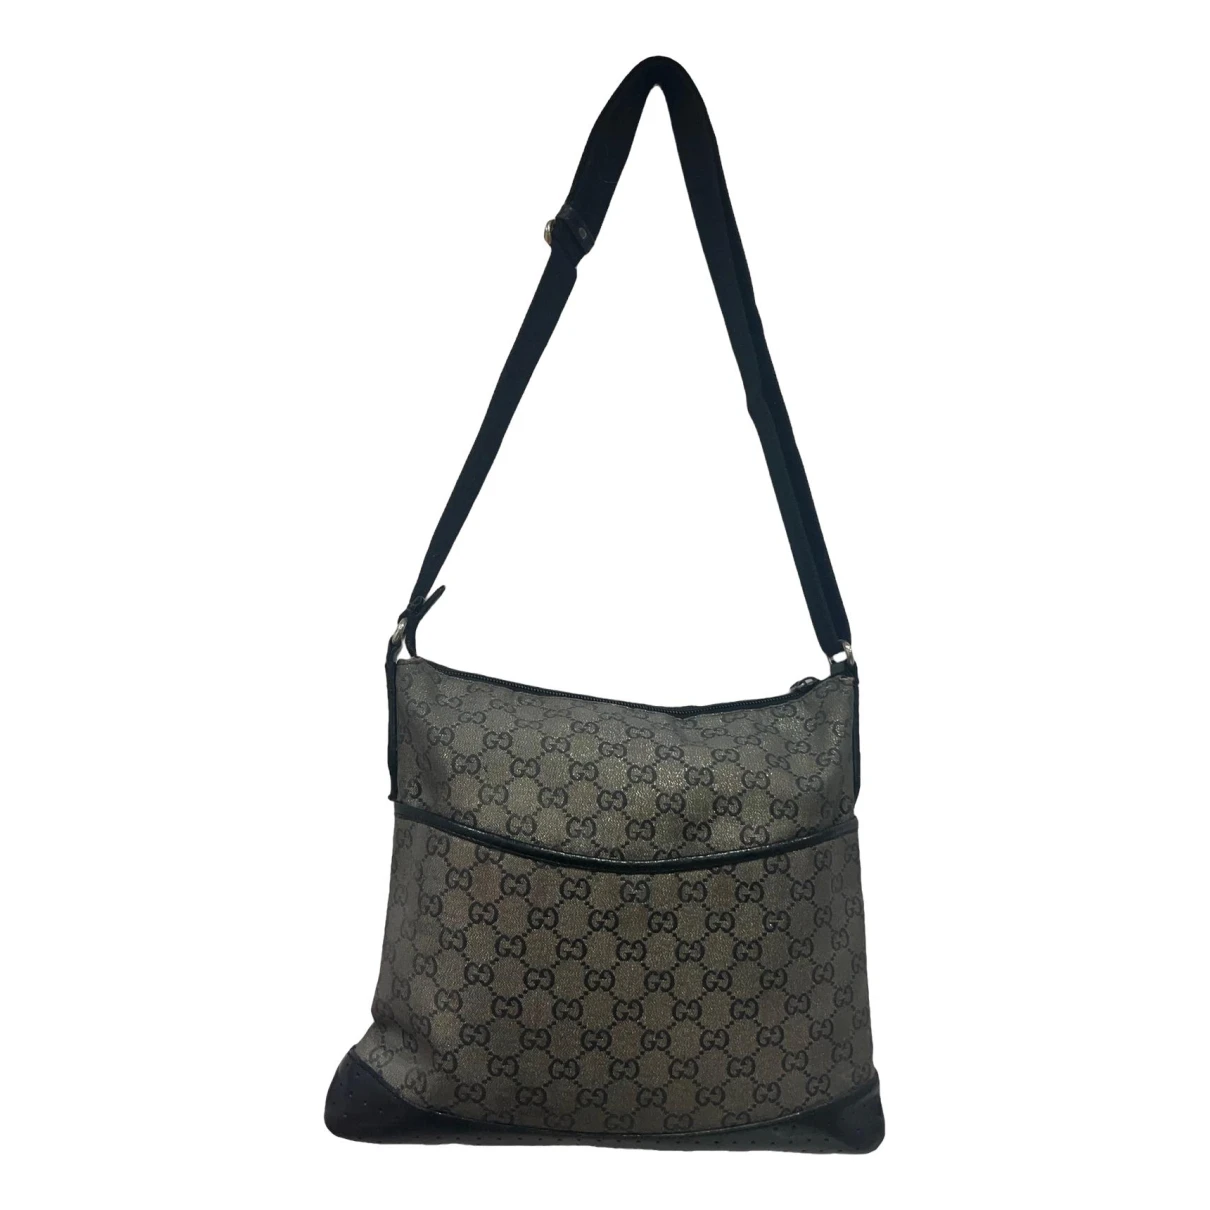 bags Gucci handbags Horsebit 1955 Messenger for Female Cloth. Used condition